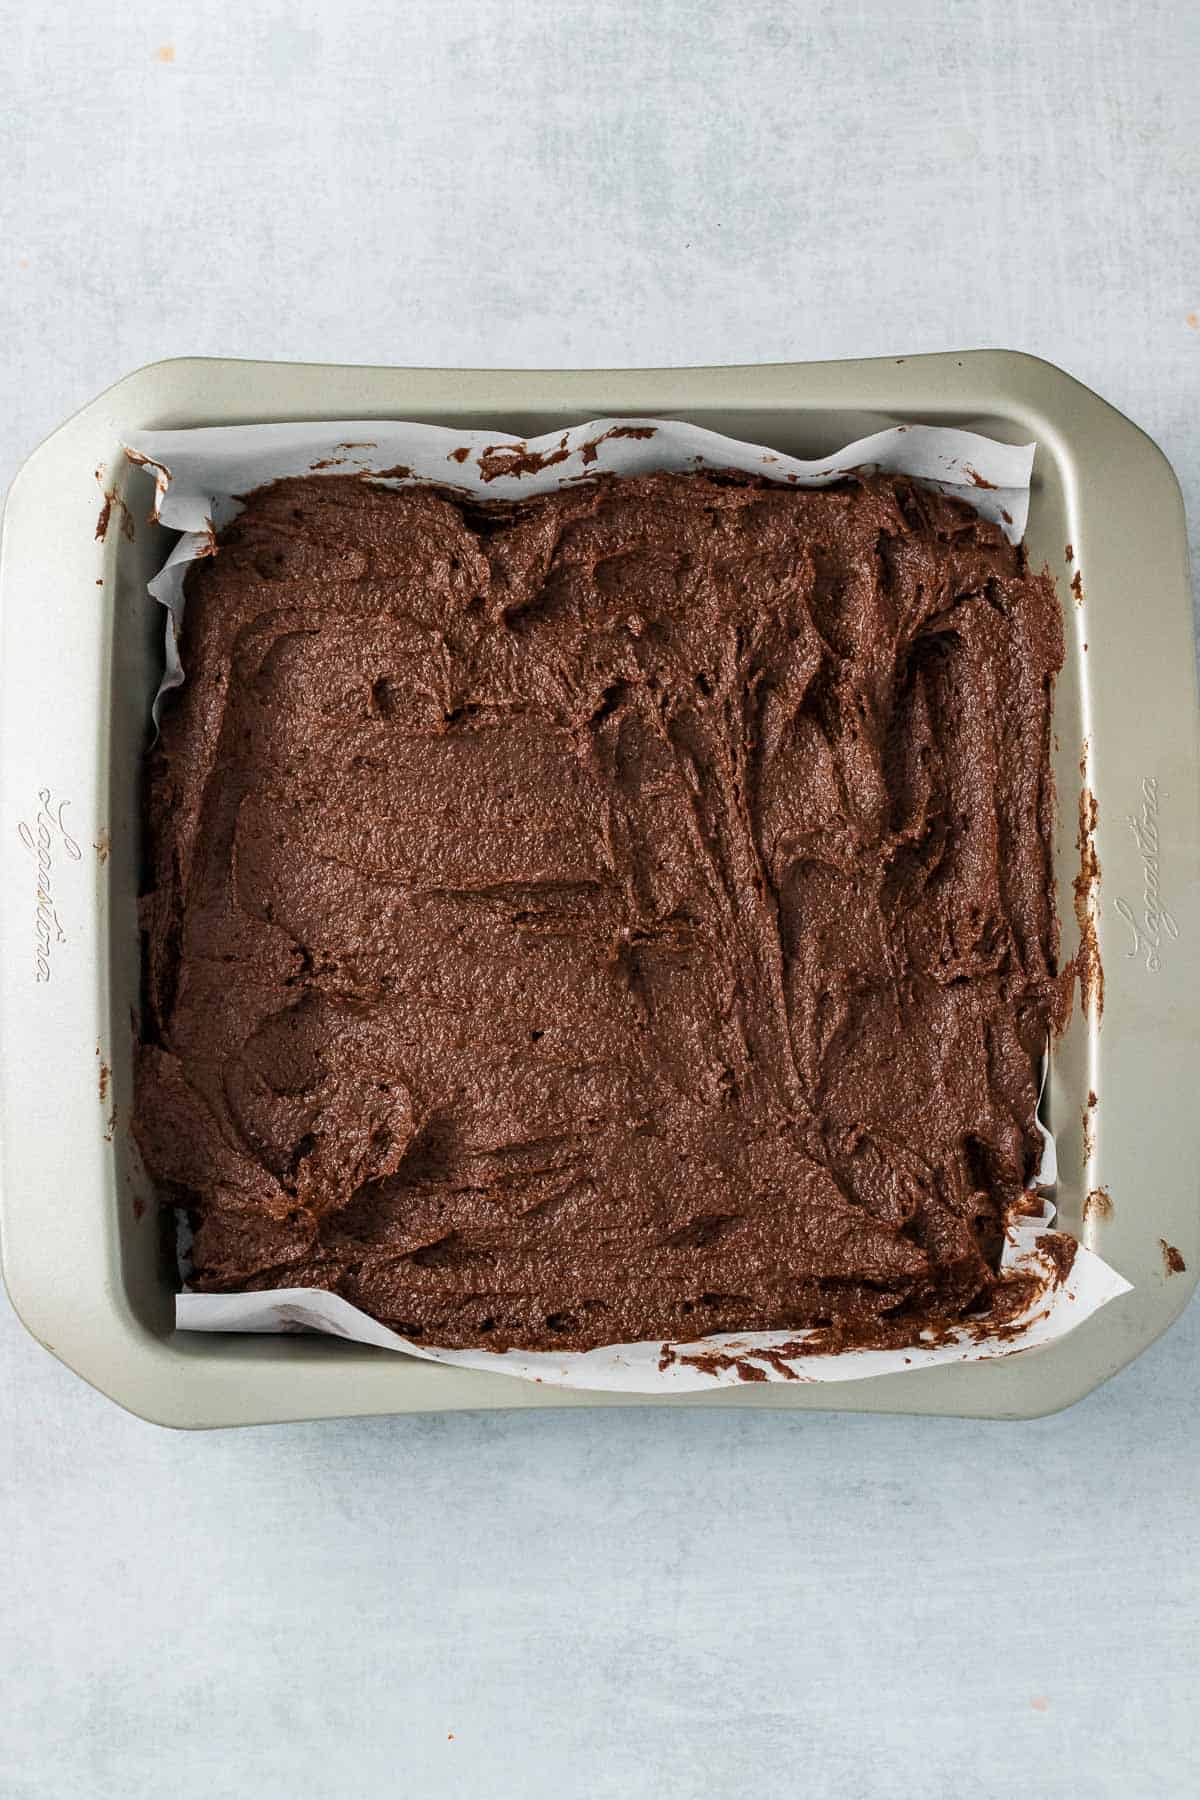 Brownie batter in a square baking dish over parchment paper, ready to bake